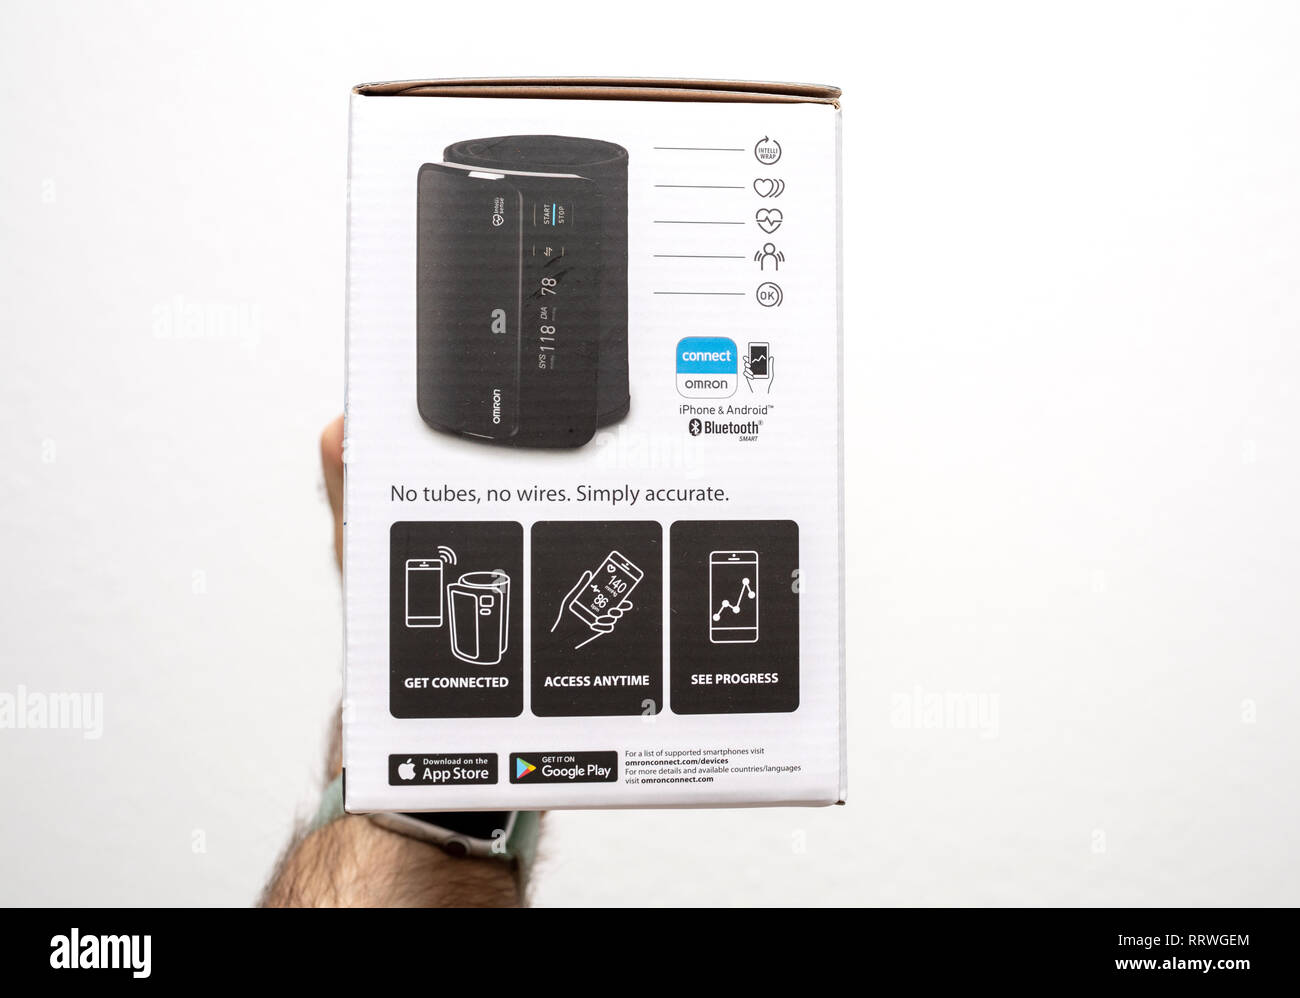 https://c8.alamy.com/comp/RRWGEM/paris-france-oct-30-2018-pictograms-and-instructions-on-cardboard-box-of-omron-evolv-bluetooth-wireless-upper-arm-blood-pressure-monitor-against-white-background-RRWGEM.jpg